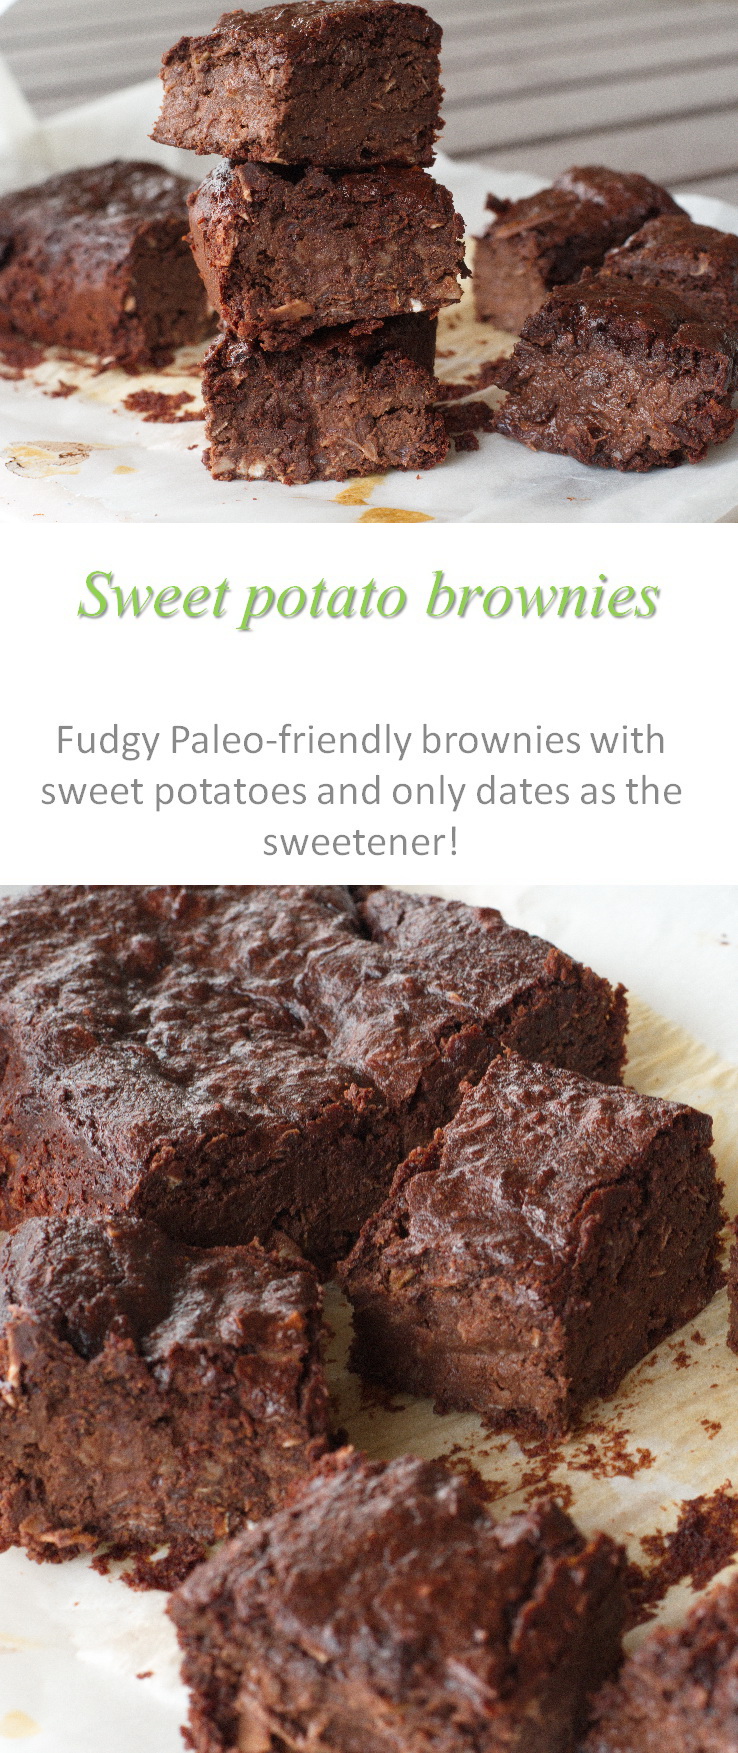 Sweet potato brownies - rich, fudge-like Paleo-friendly brownies made with sweet potatoes, and naturally sweetened only with dates #brownies